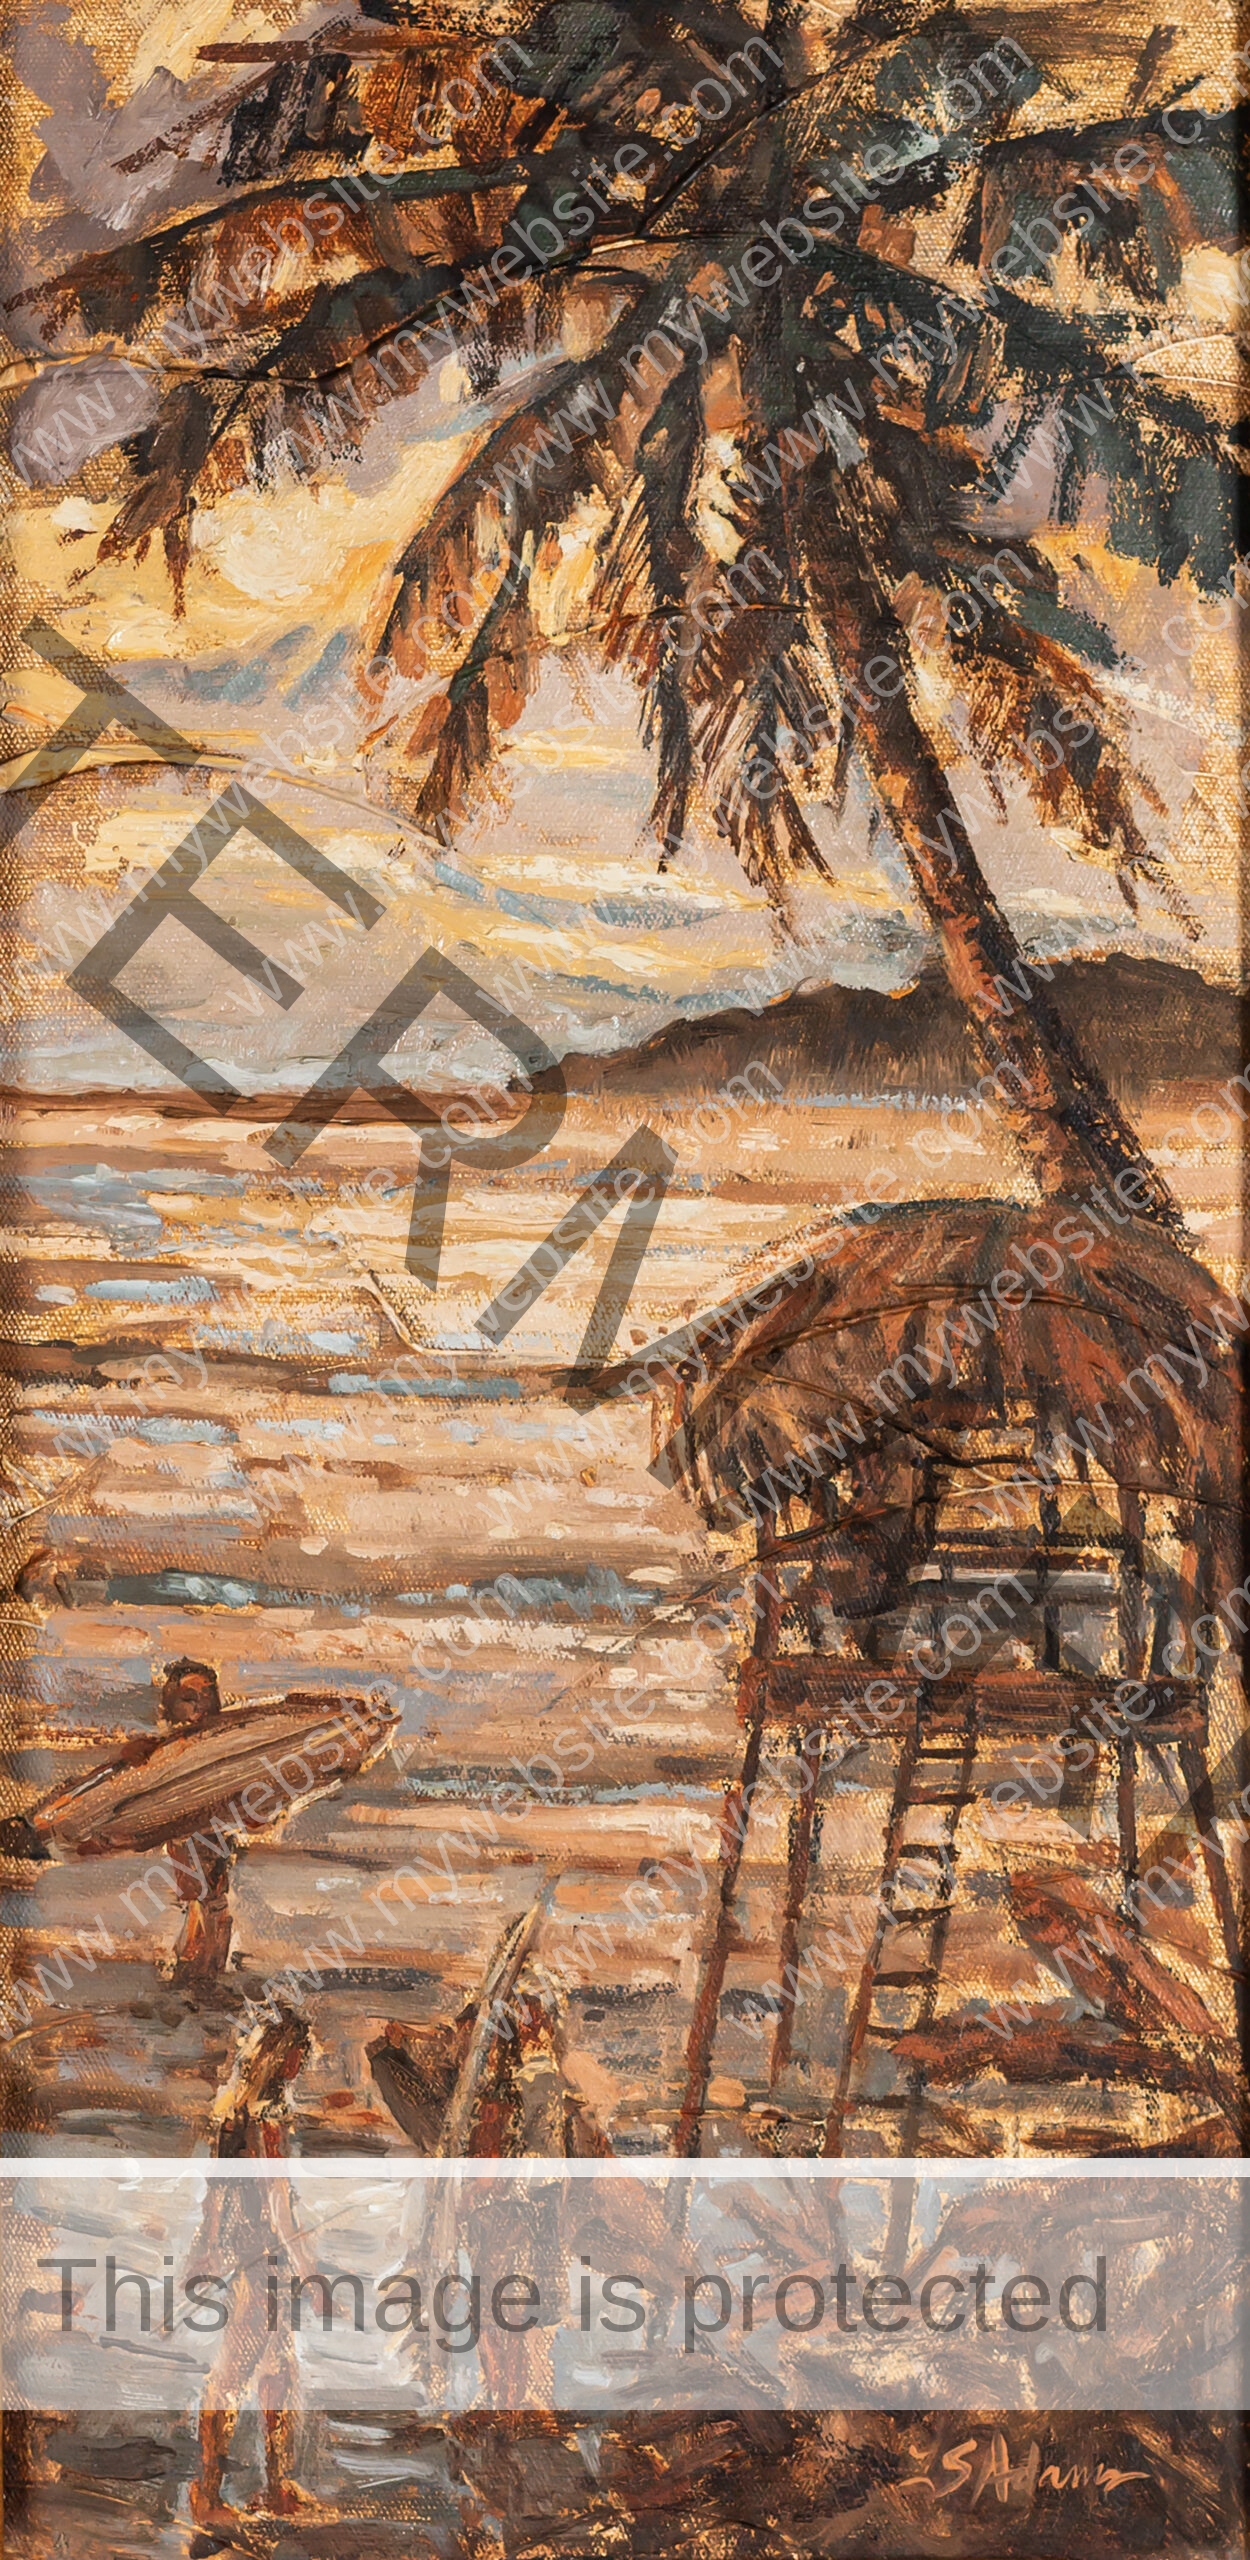 Casa de Abuela painting by Susan Adams, featuring surfers wading through the shallows of the ocean at sunset. It's a serene painting that evokes feelings of calm and serenity.